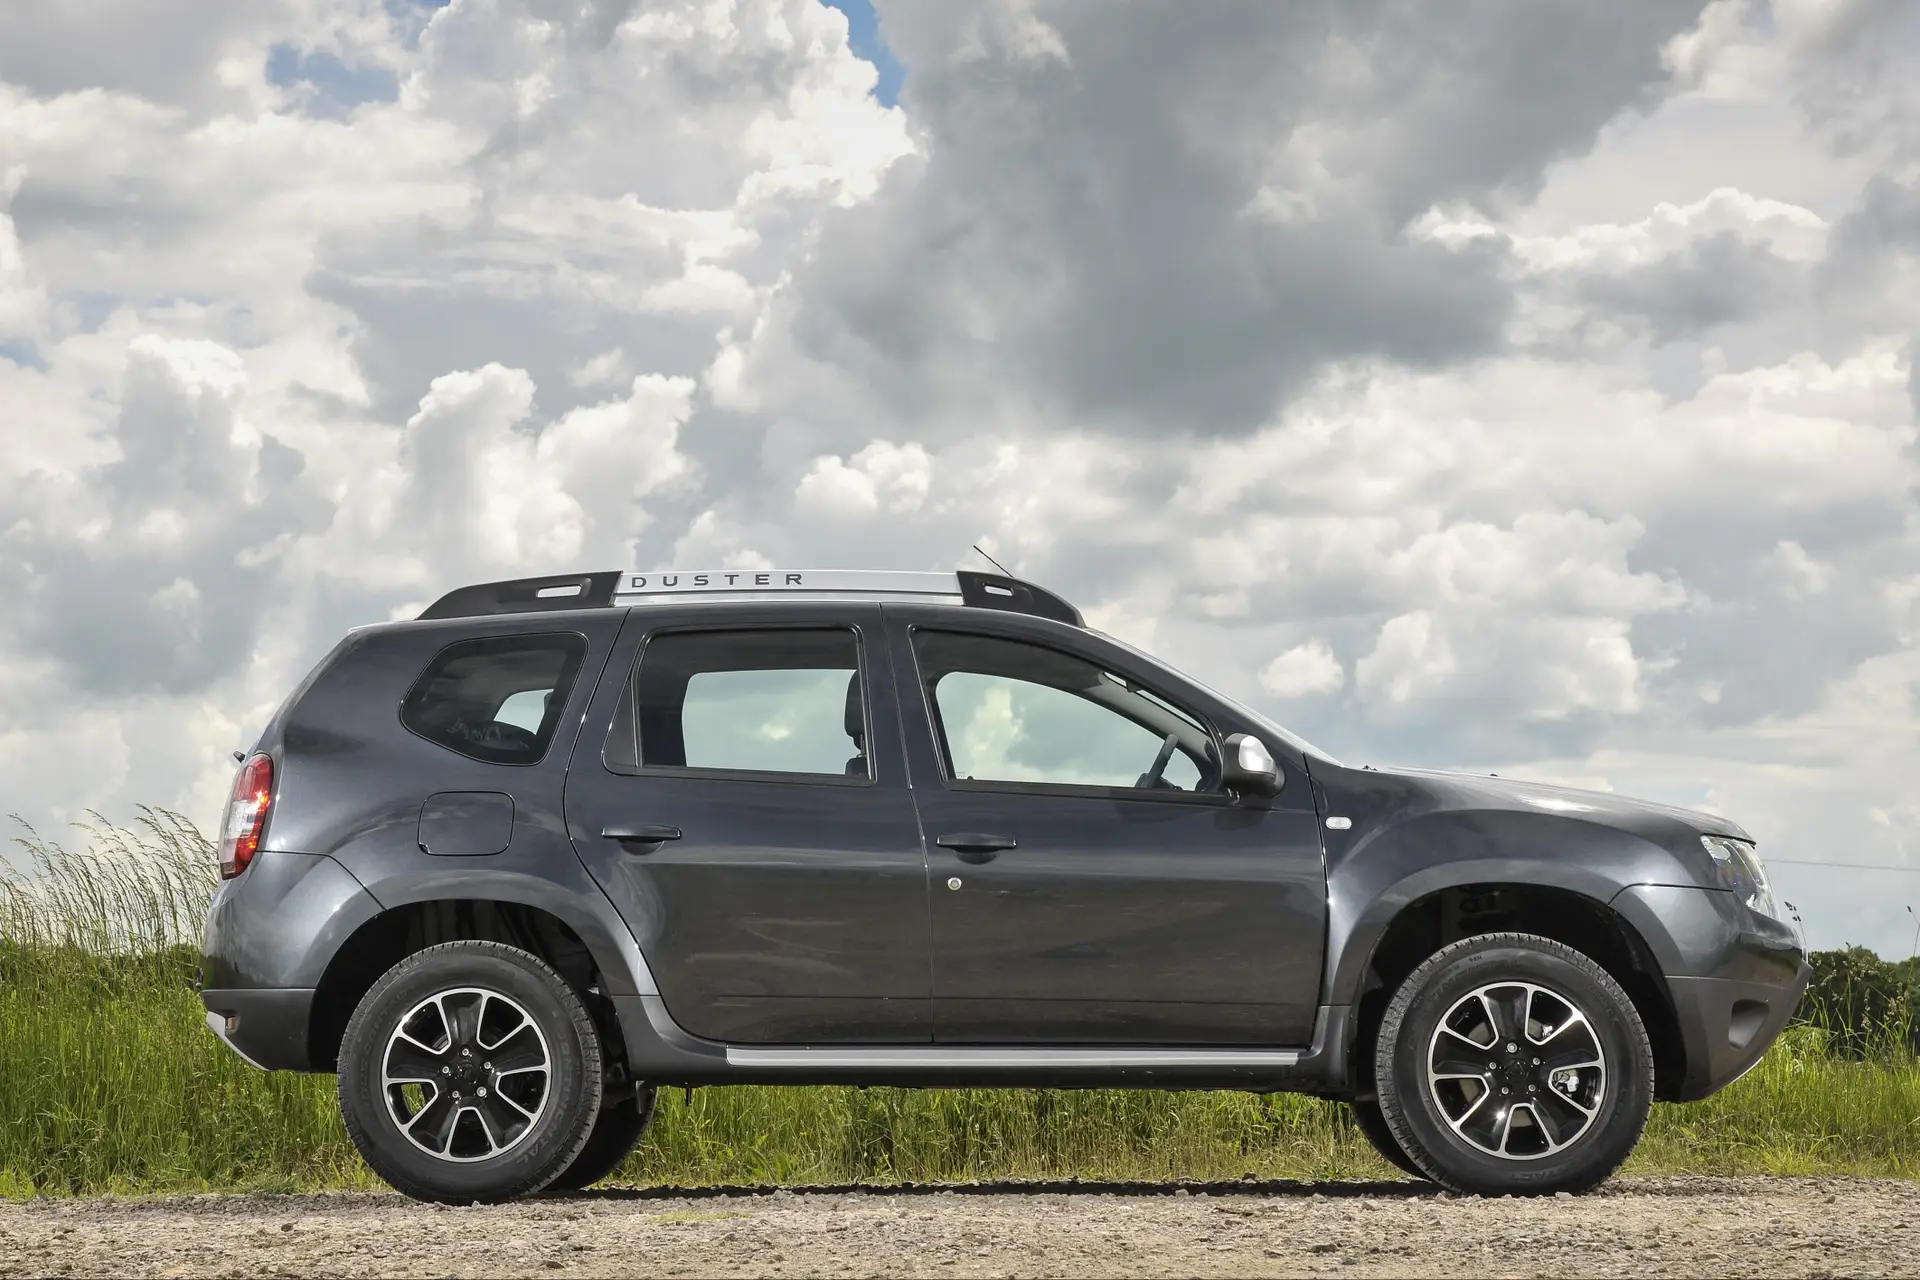 Used Dacia Duster (2012-2018) Review: exterior side photo of the Dacia Duster